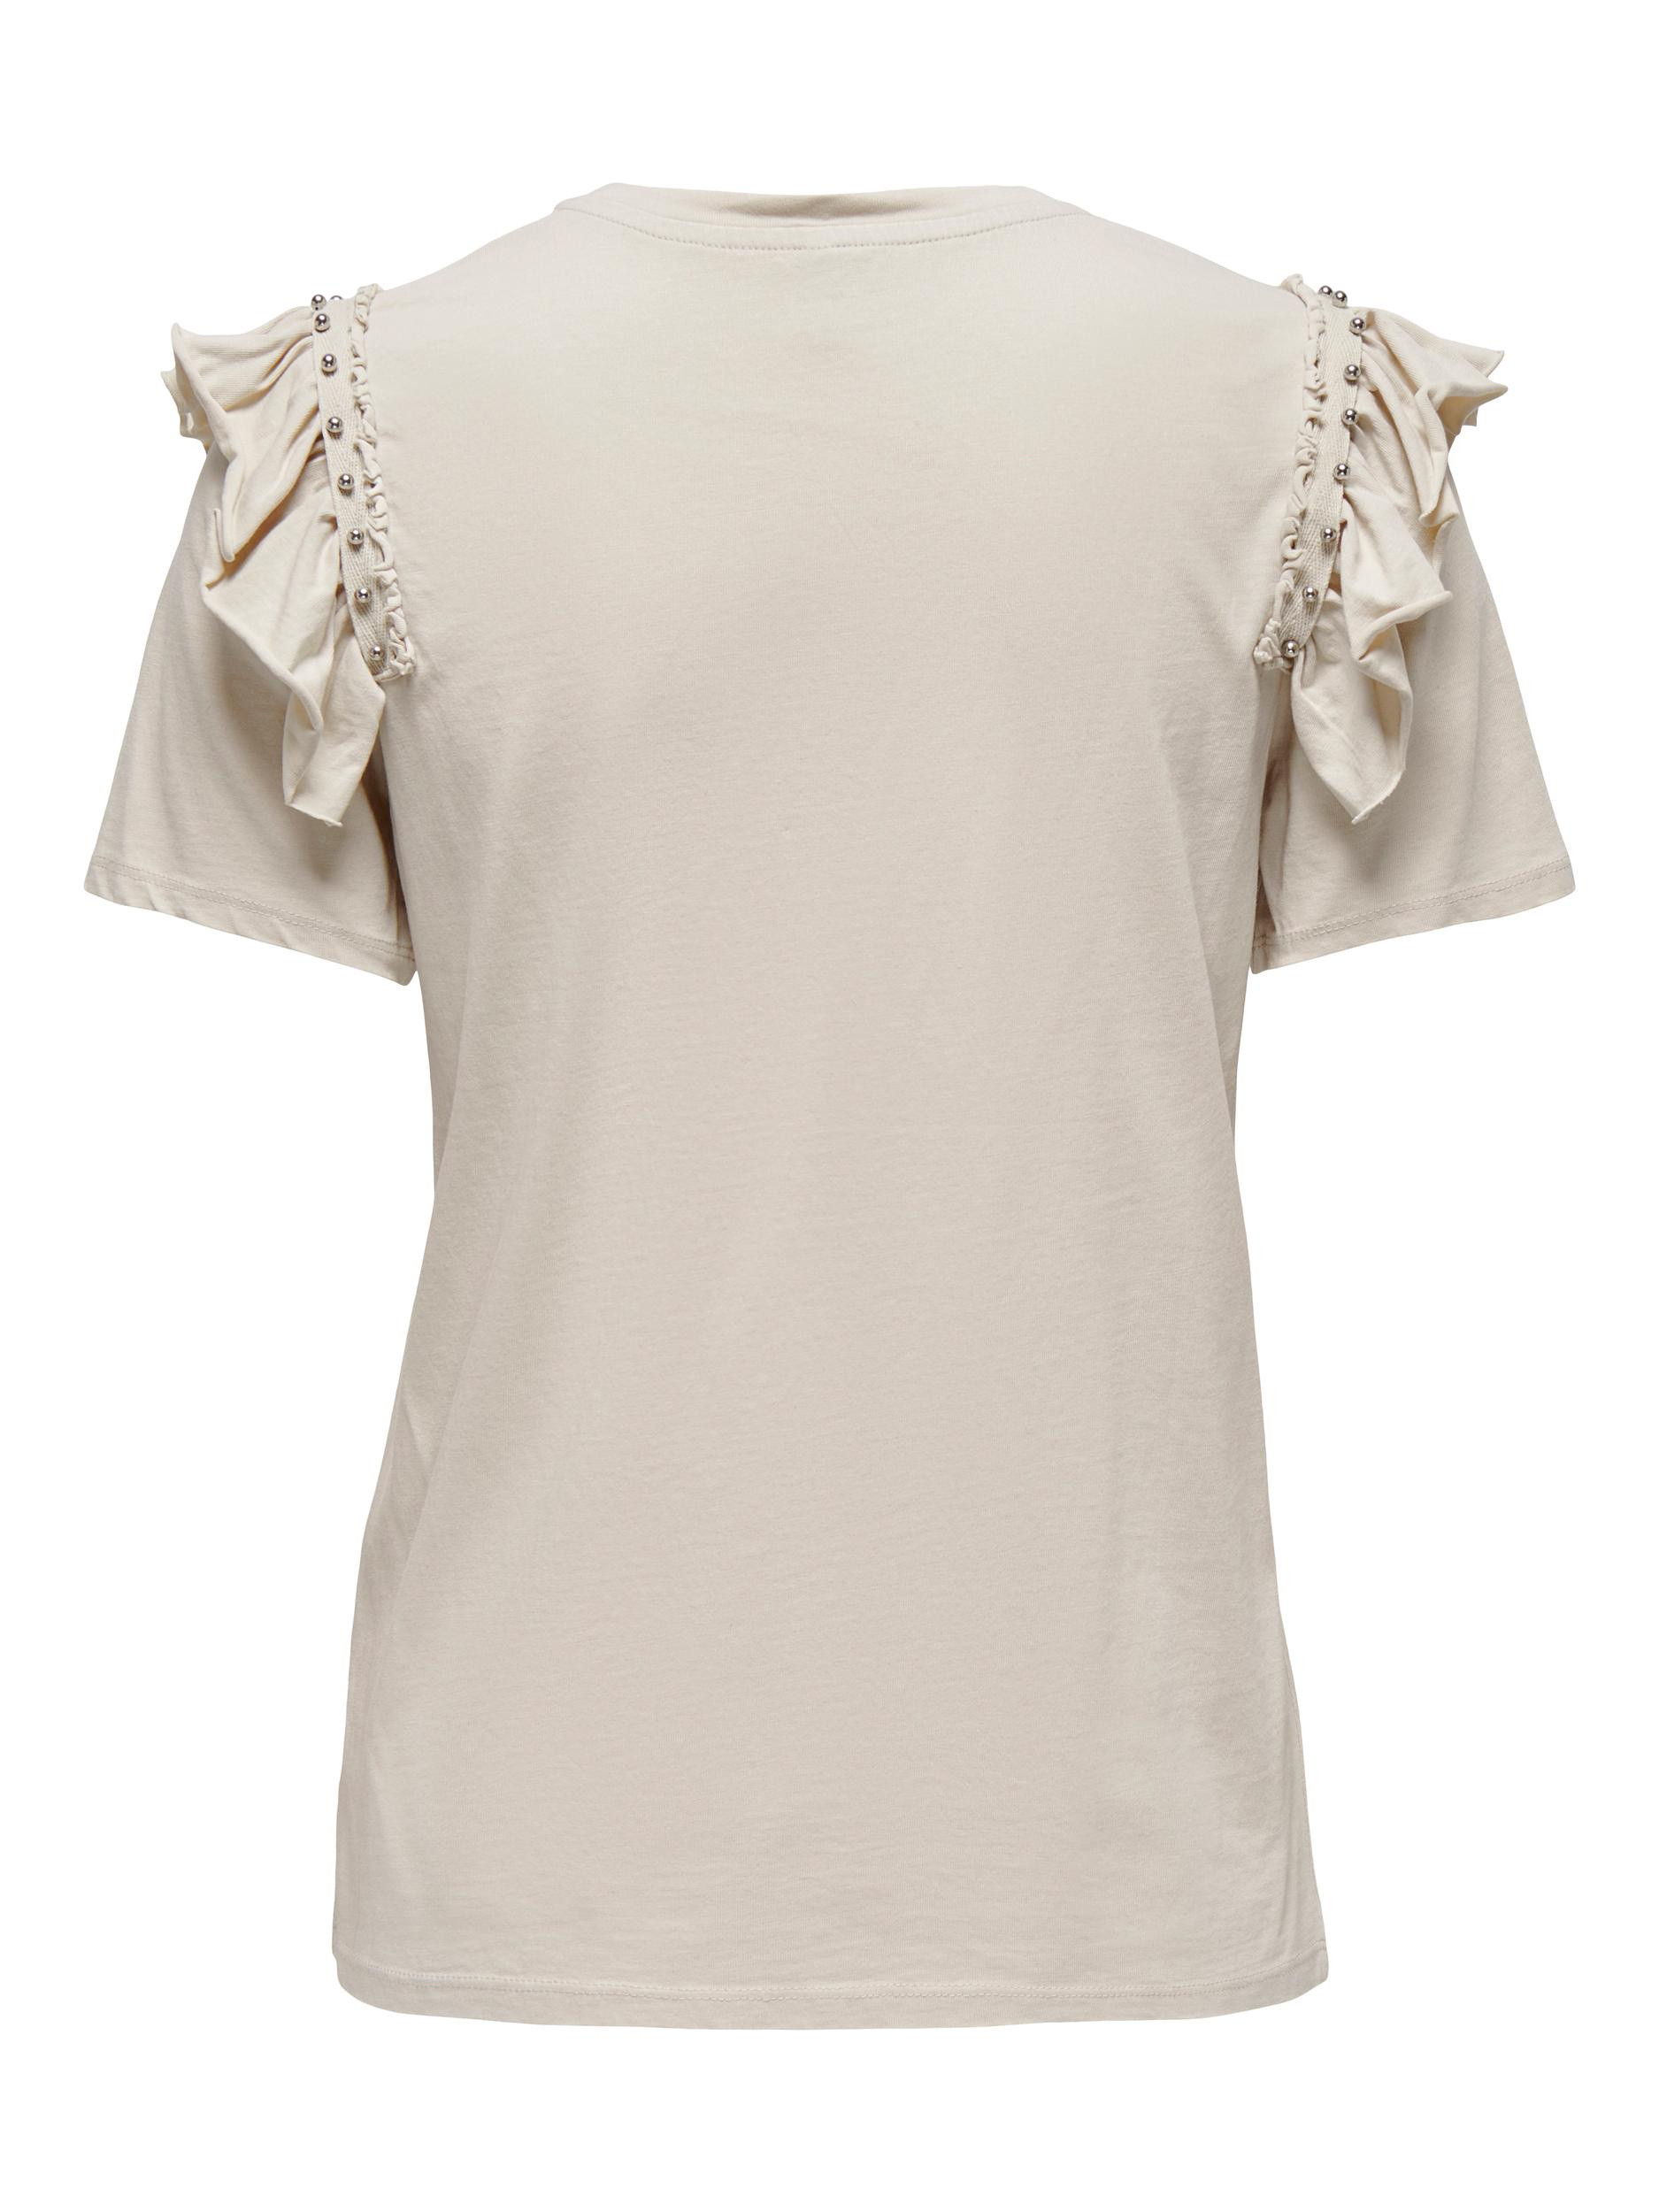 Only - Regular fit cotton T-shirt with ruffles, Beige, large image number 1